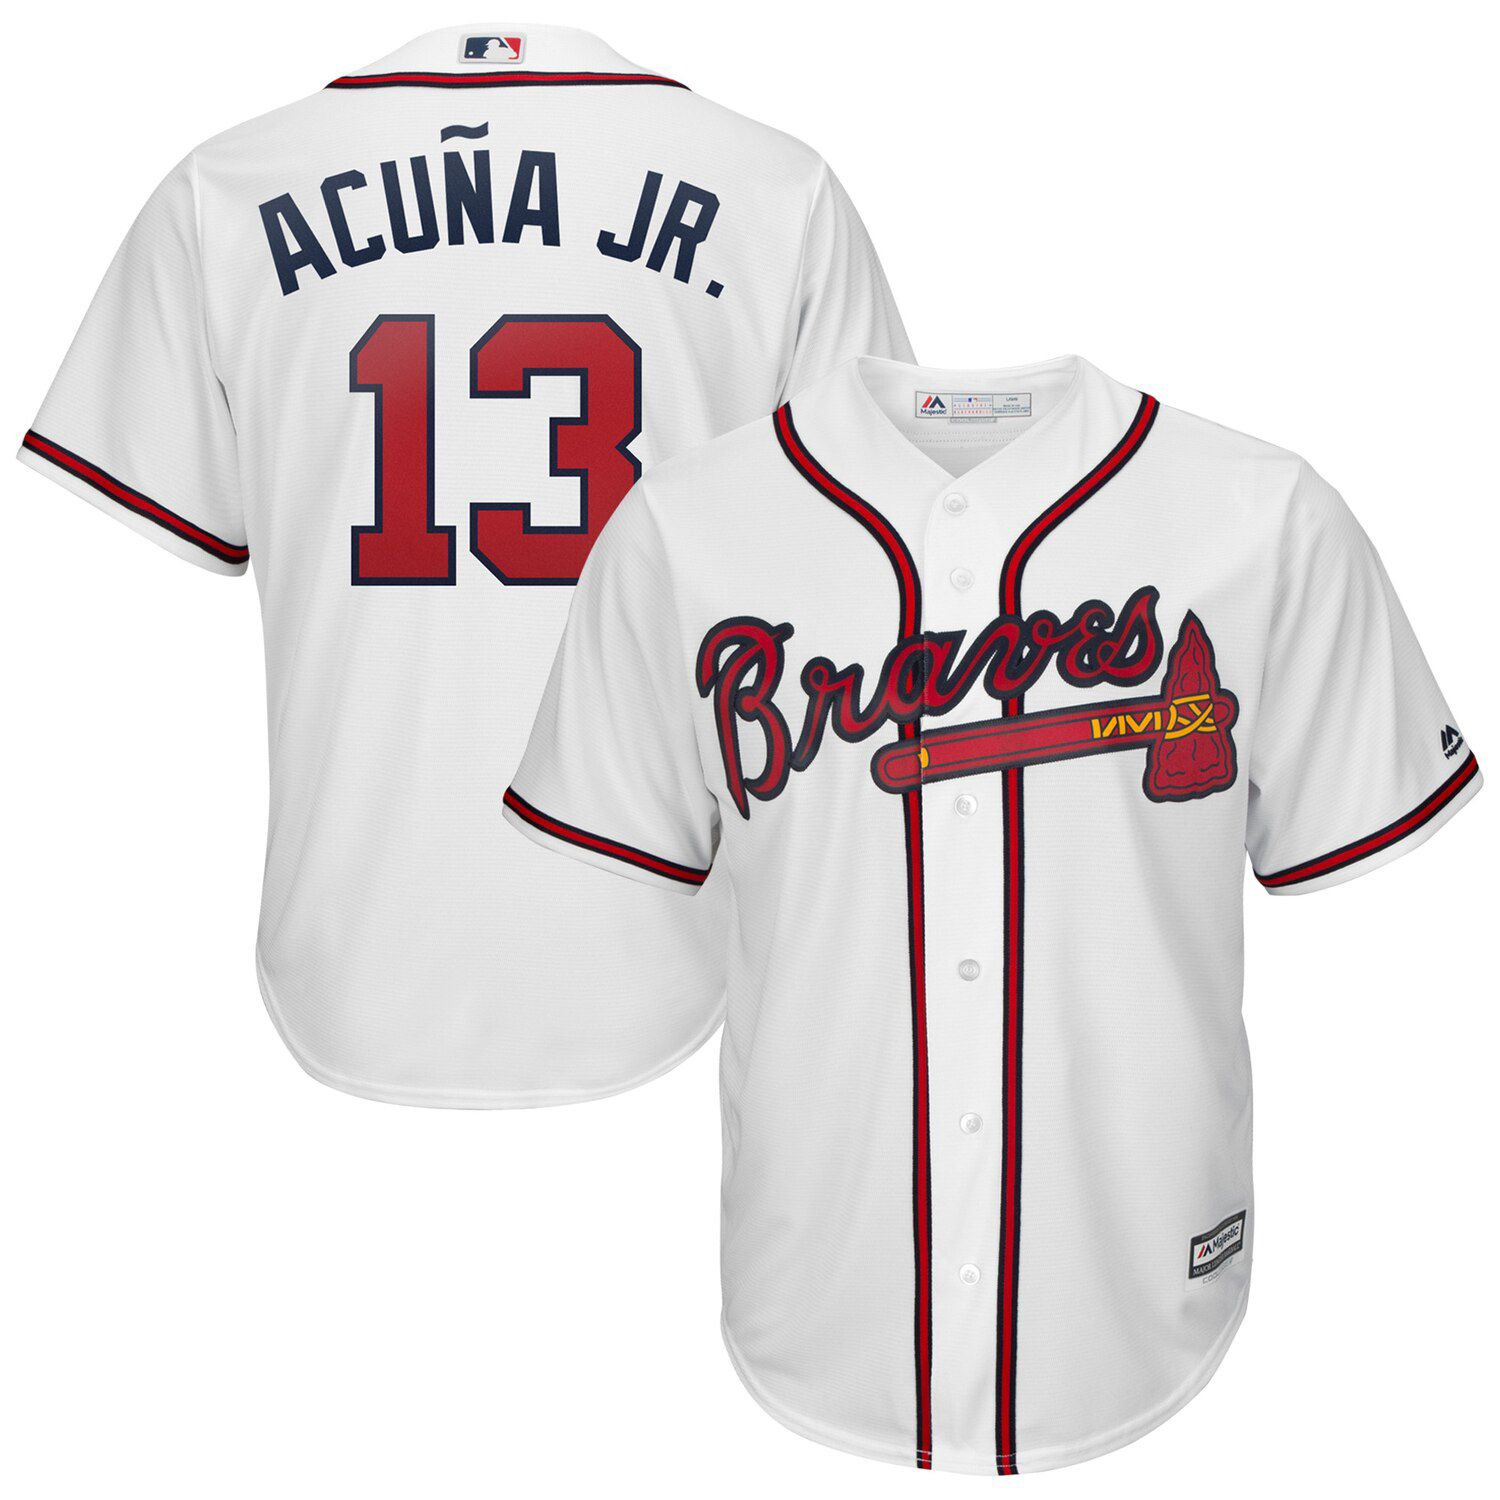 2019 Home Official Cool Base Player Jersey